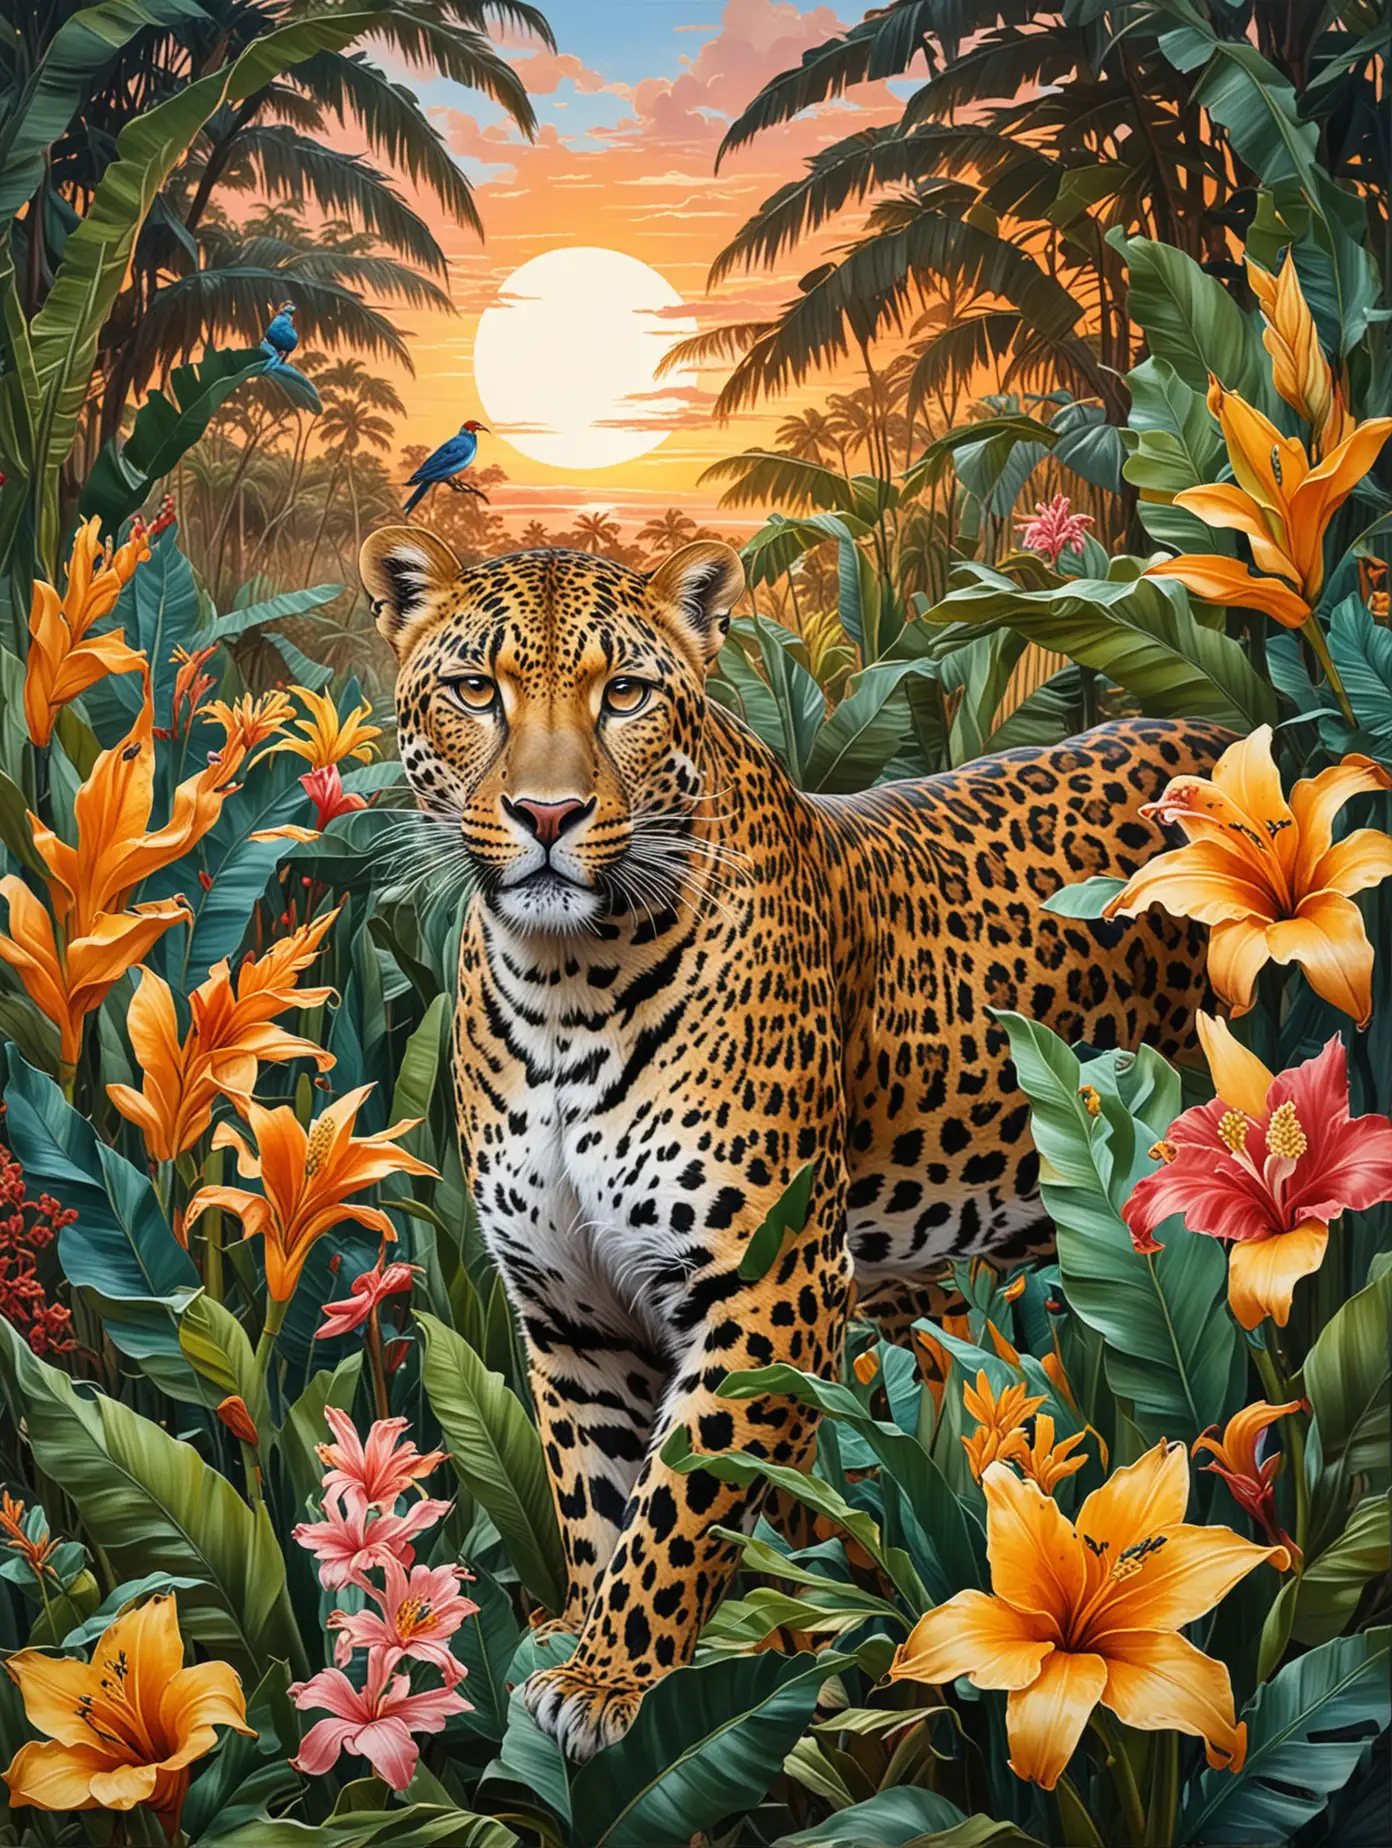 a painting done in an expressionist style of a leopard surrounded by banana leaves and tropical flowers and tropical birds, in the background a sunset